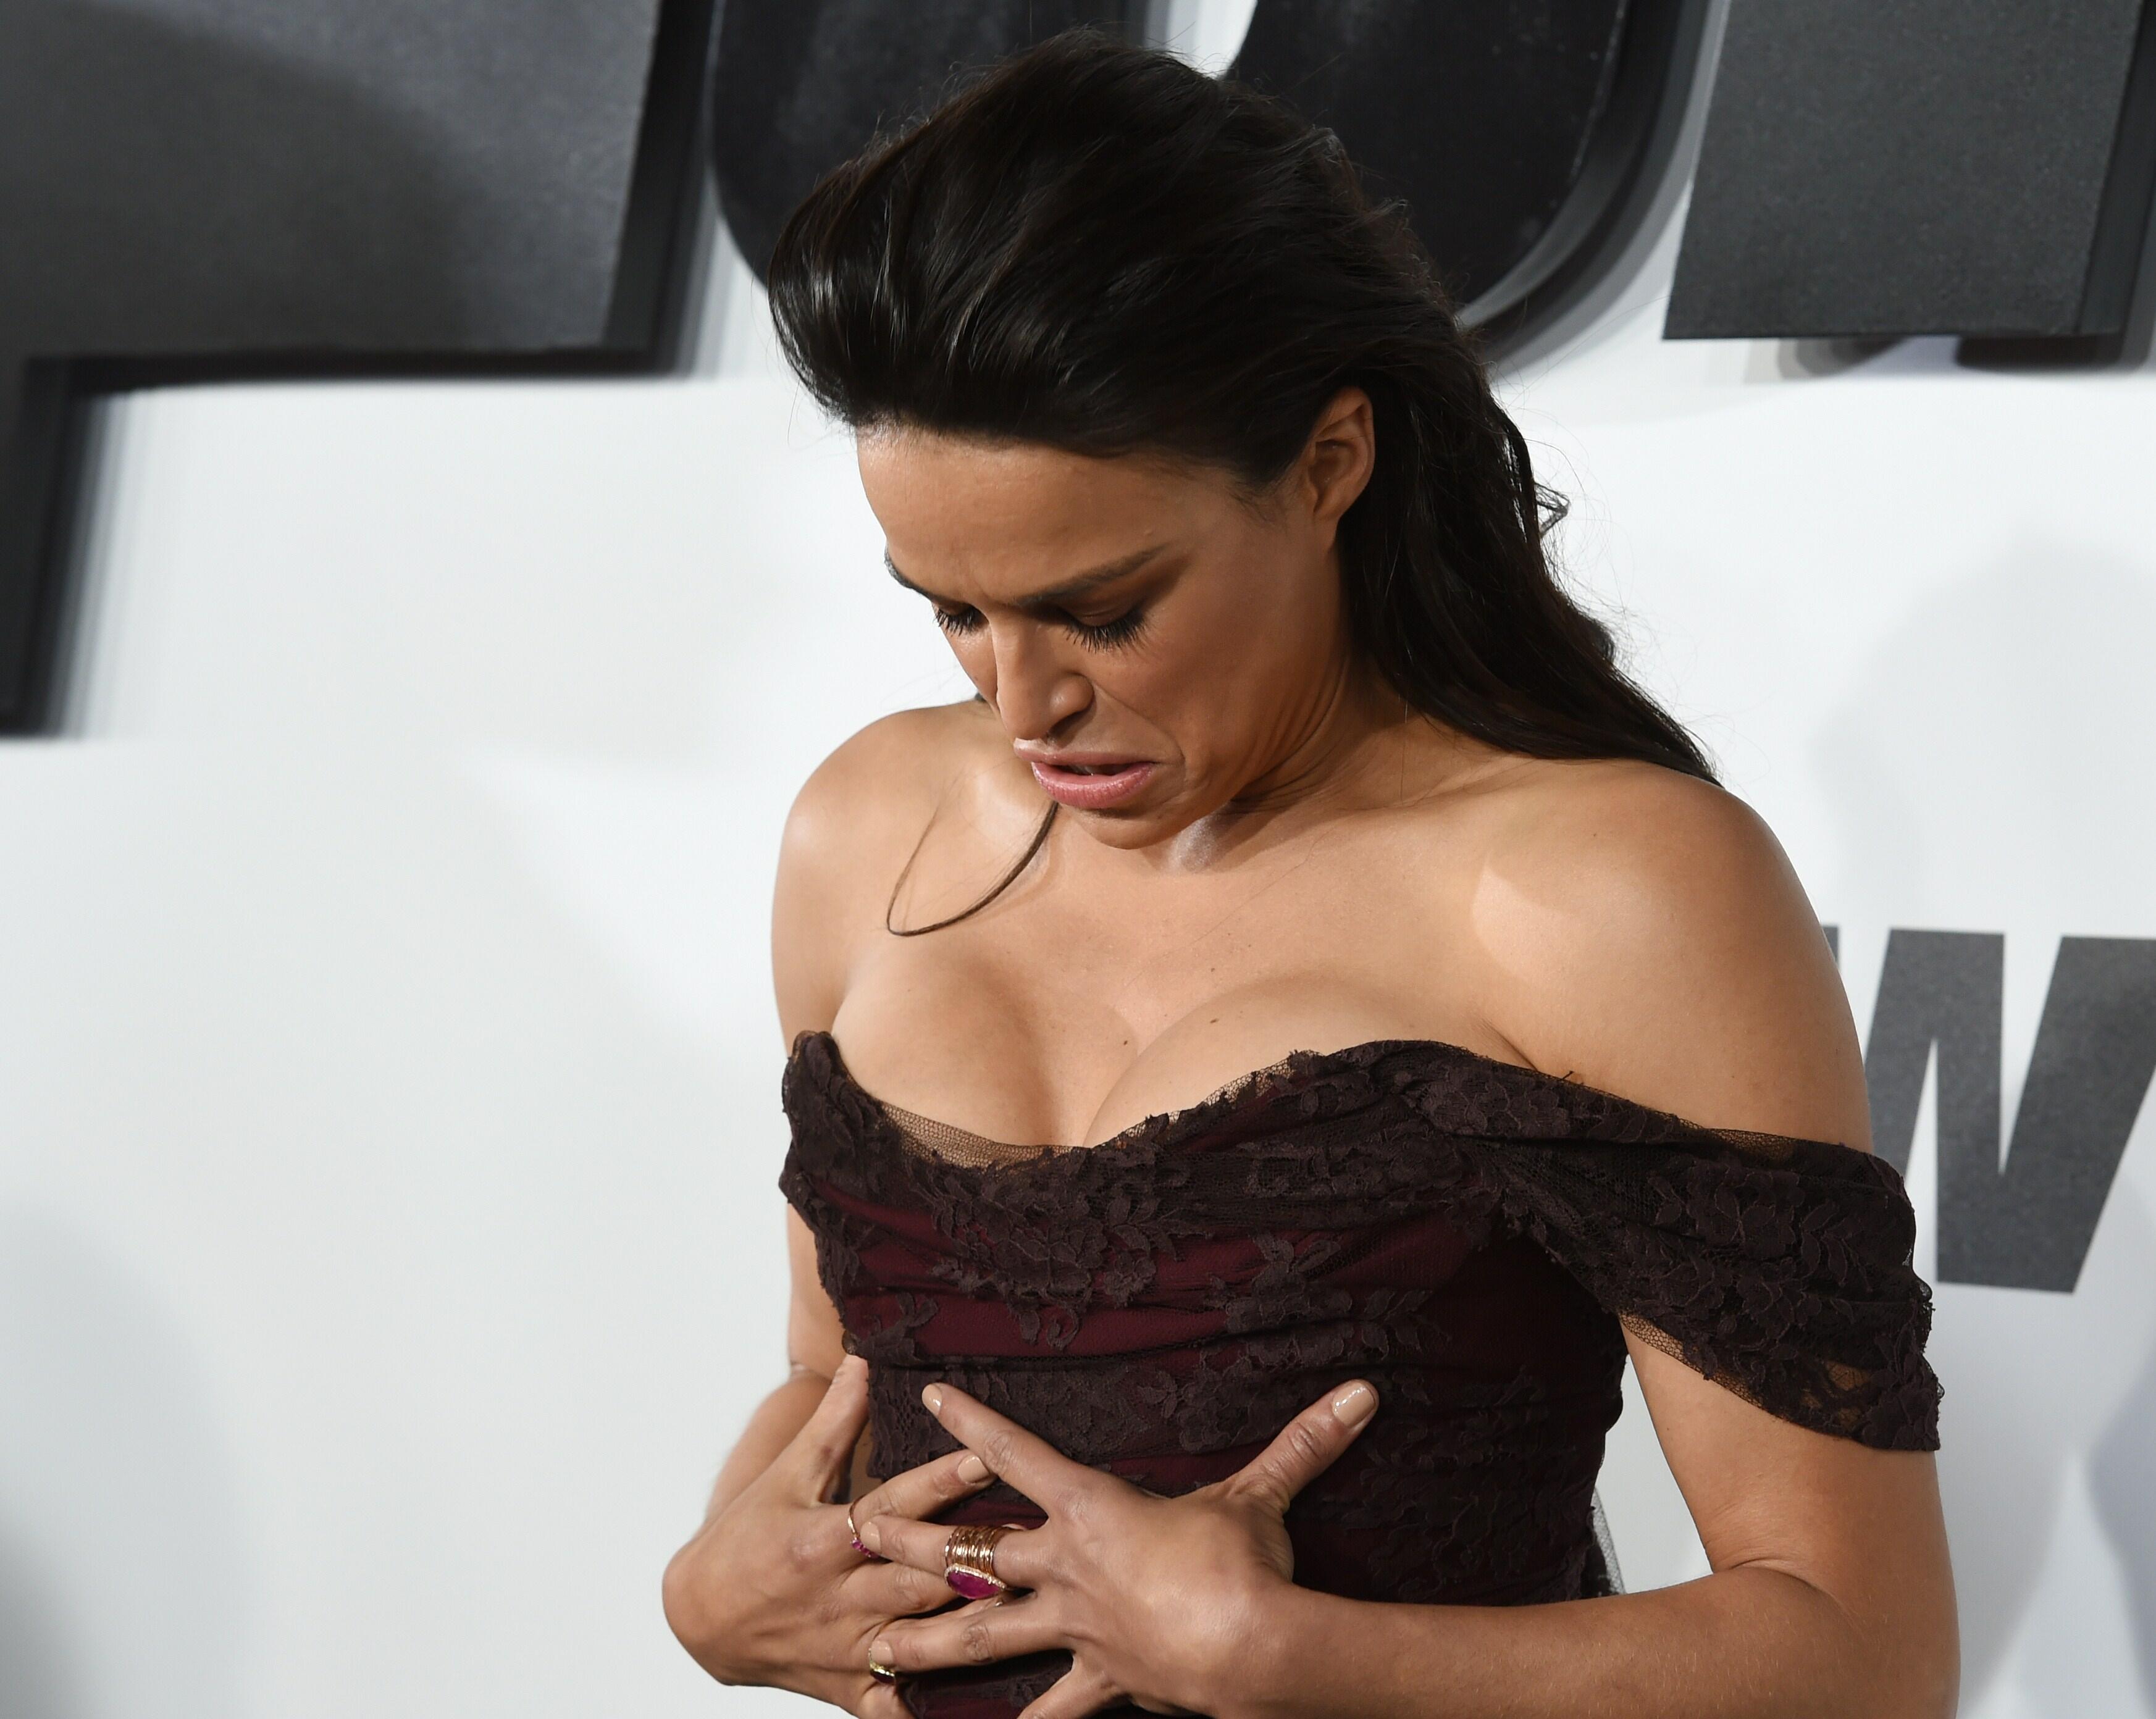 Actress Michelle Rodriguez attends the premiere of 'Furious 7' held at the TCL Chinese Theatre in Hollywood, California on April 1, 2015.           AFP PHOTO/Mark RALSTON        (Photo credit should read MARK RALSTON/AFP/Getty Images)